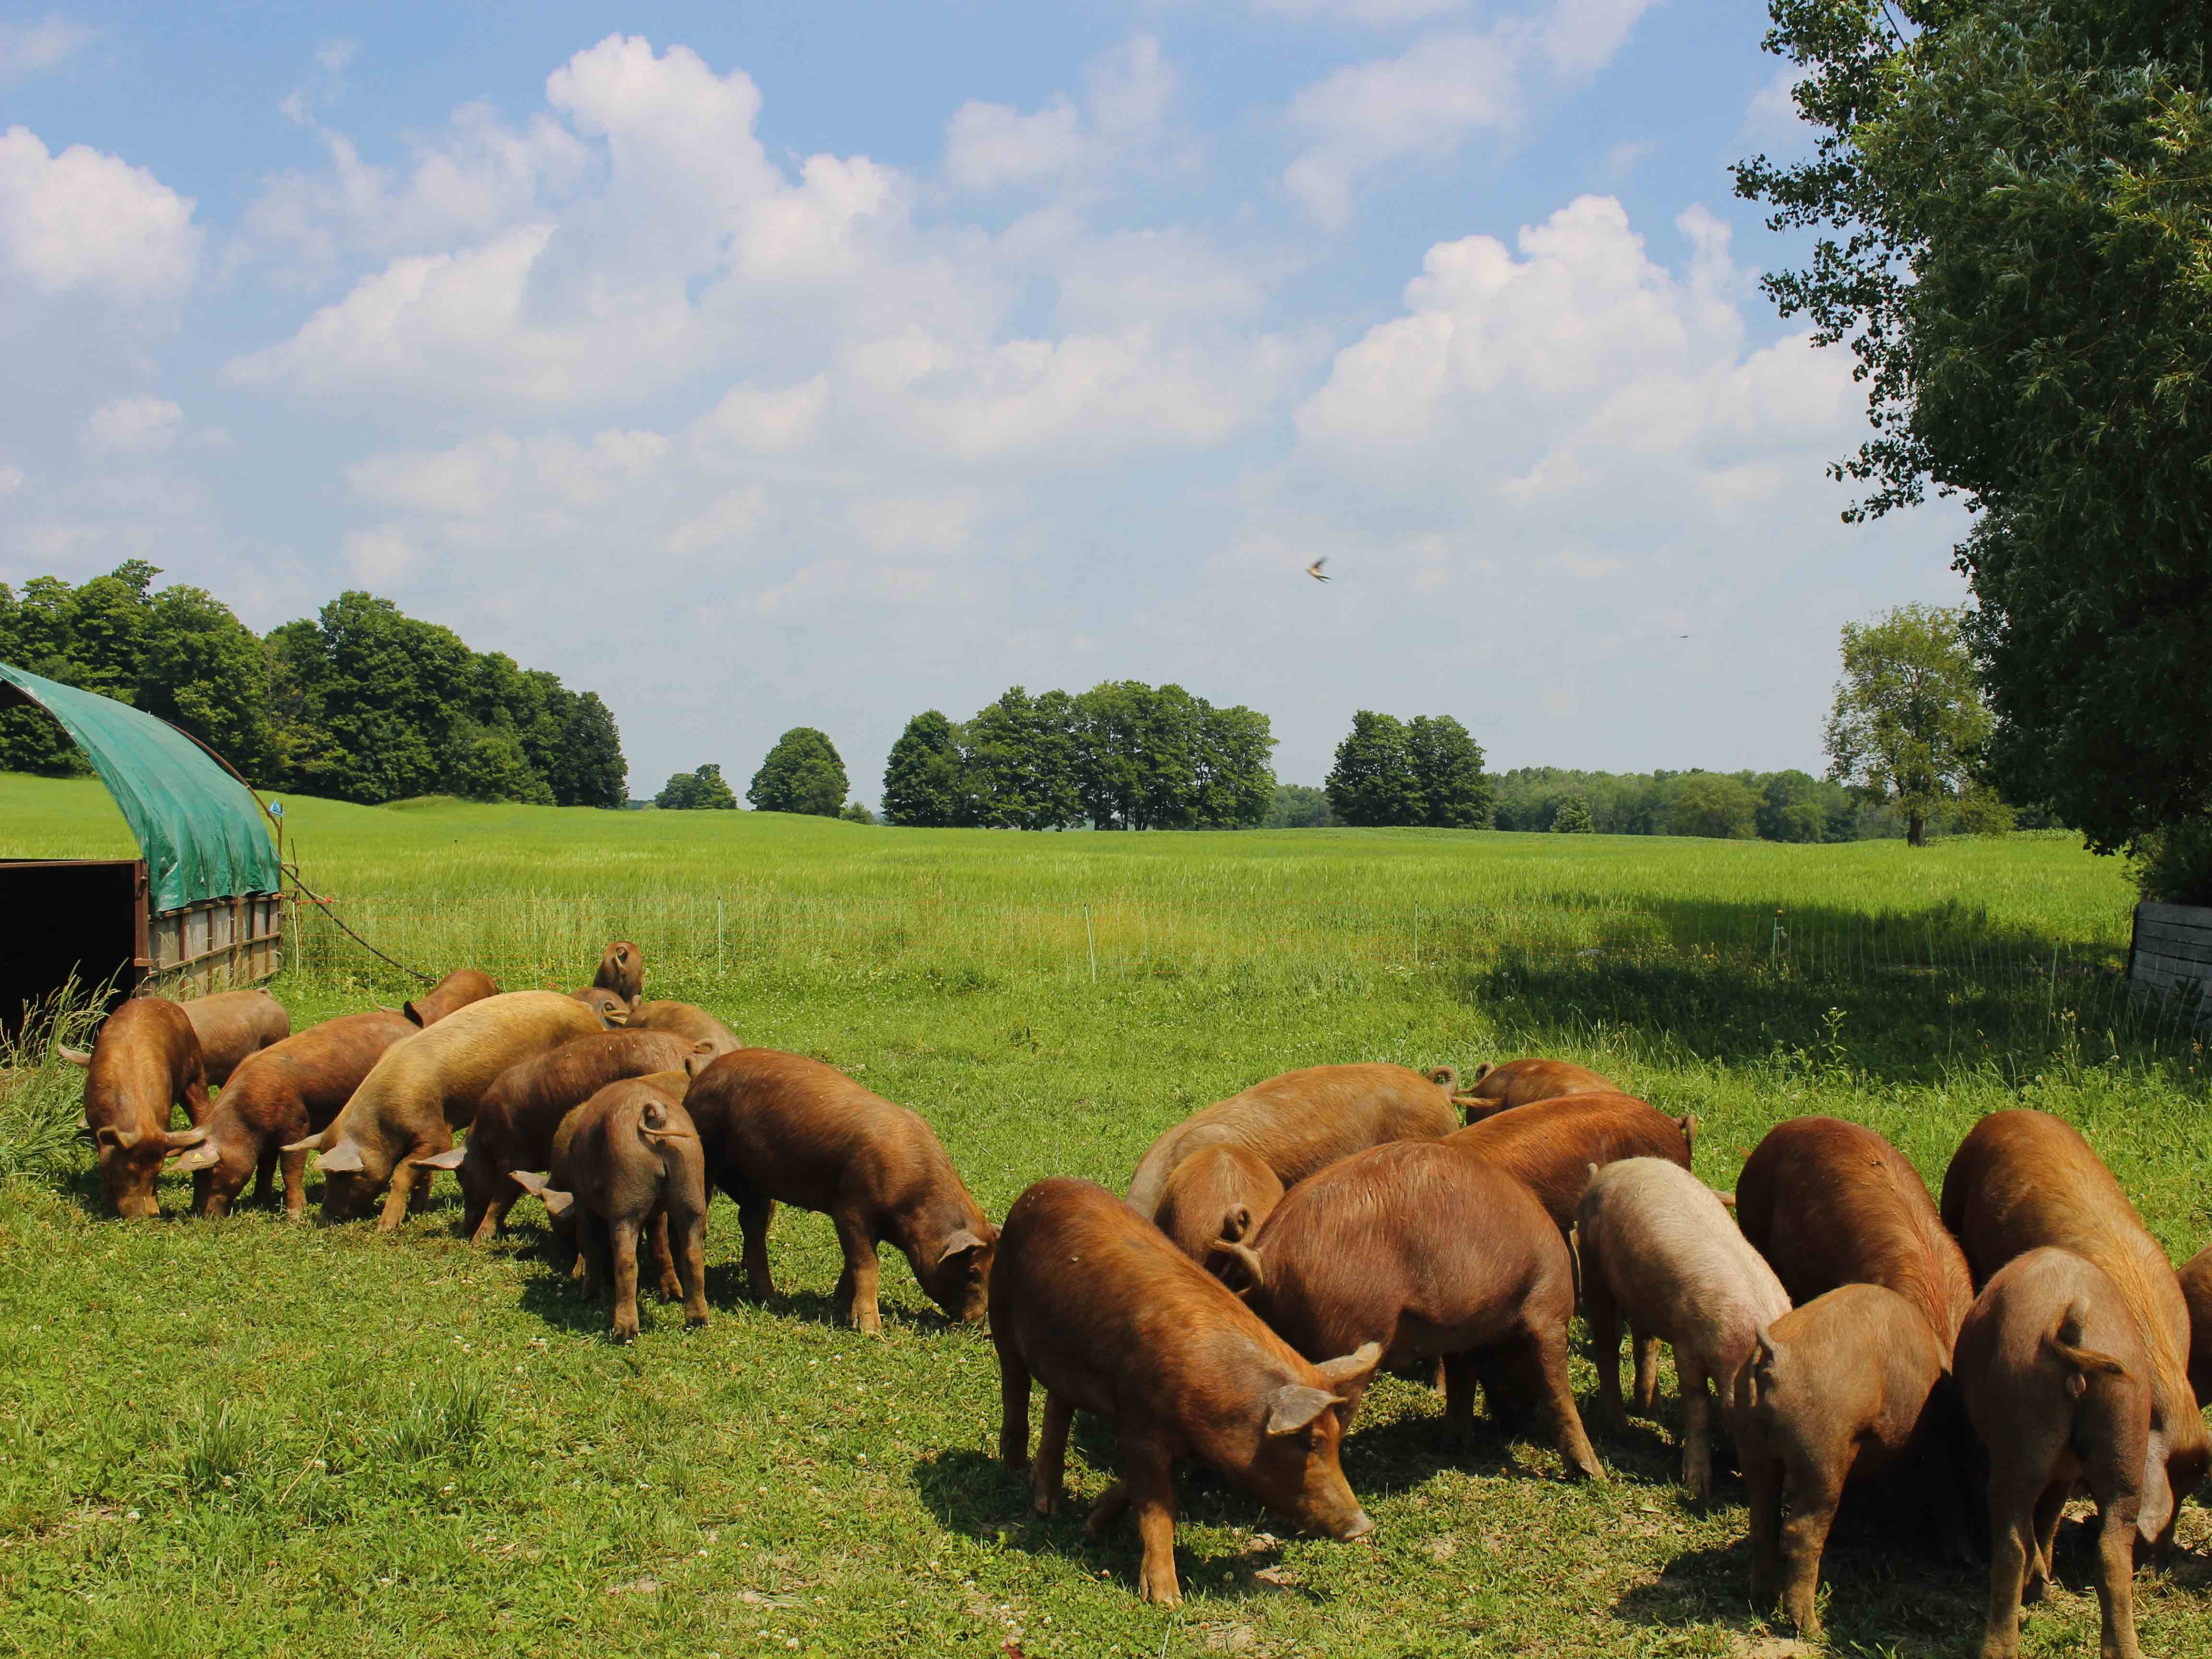 A group of pigs grazing in a very green pasture.